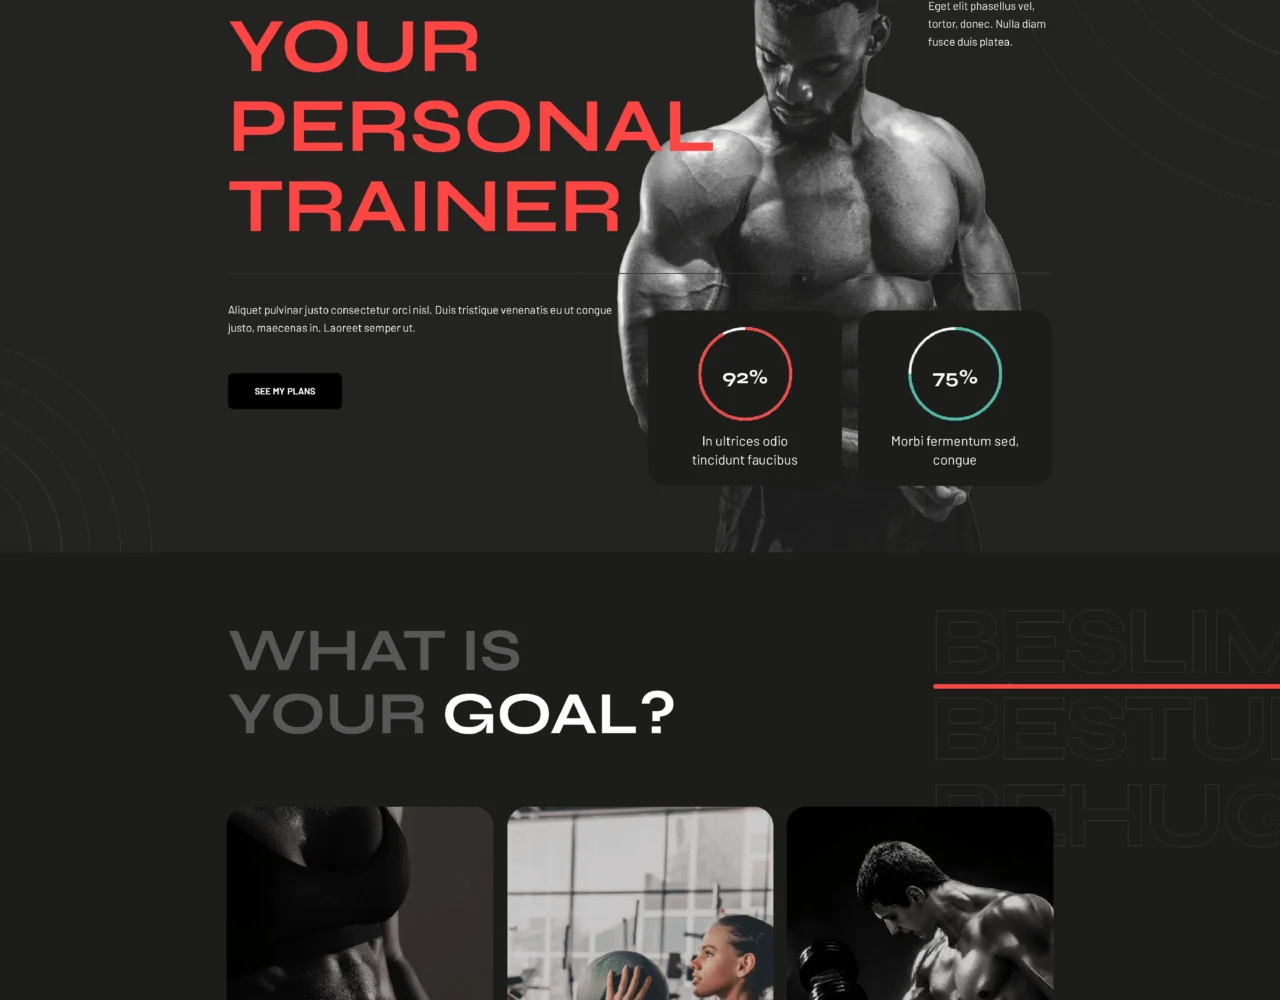 Personal Trainer page built website for our page ASATA.io.